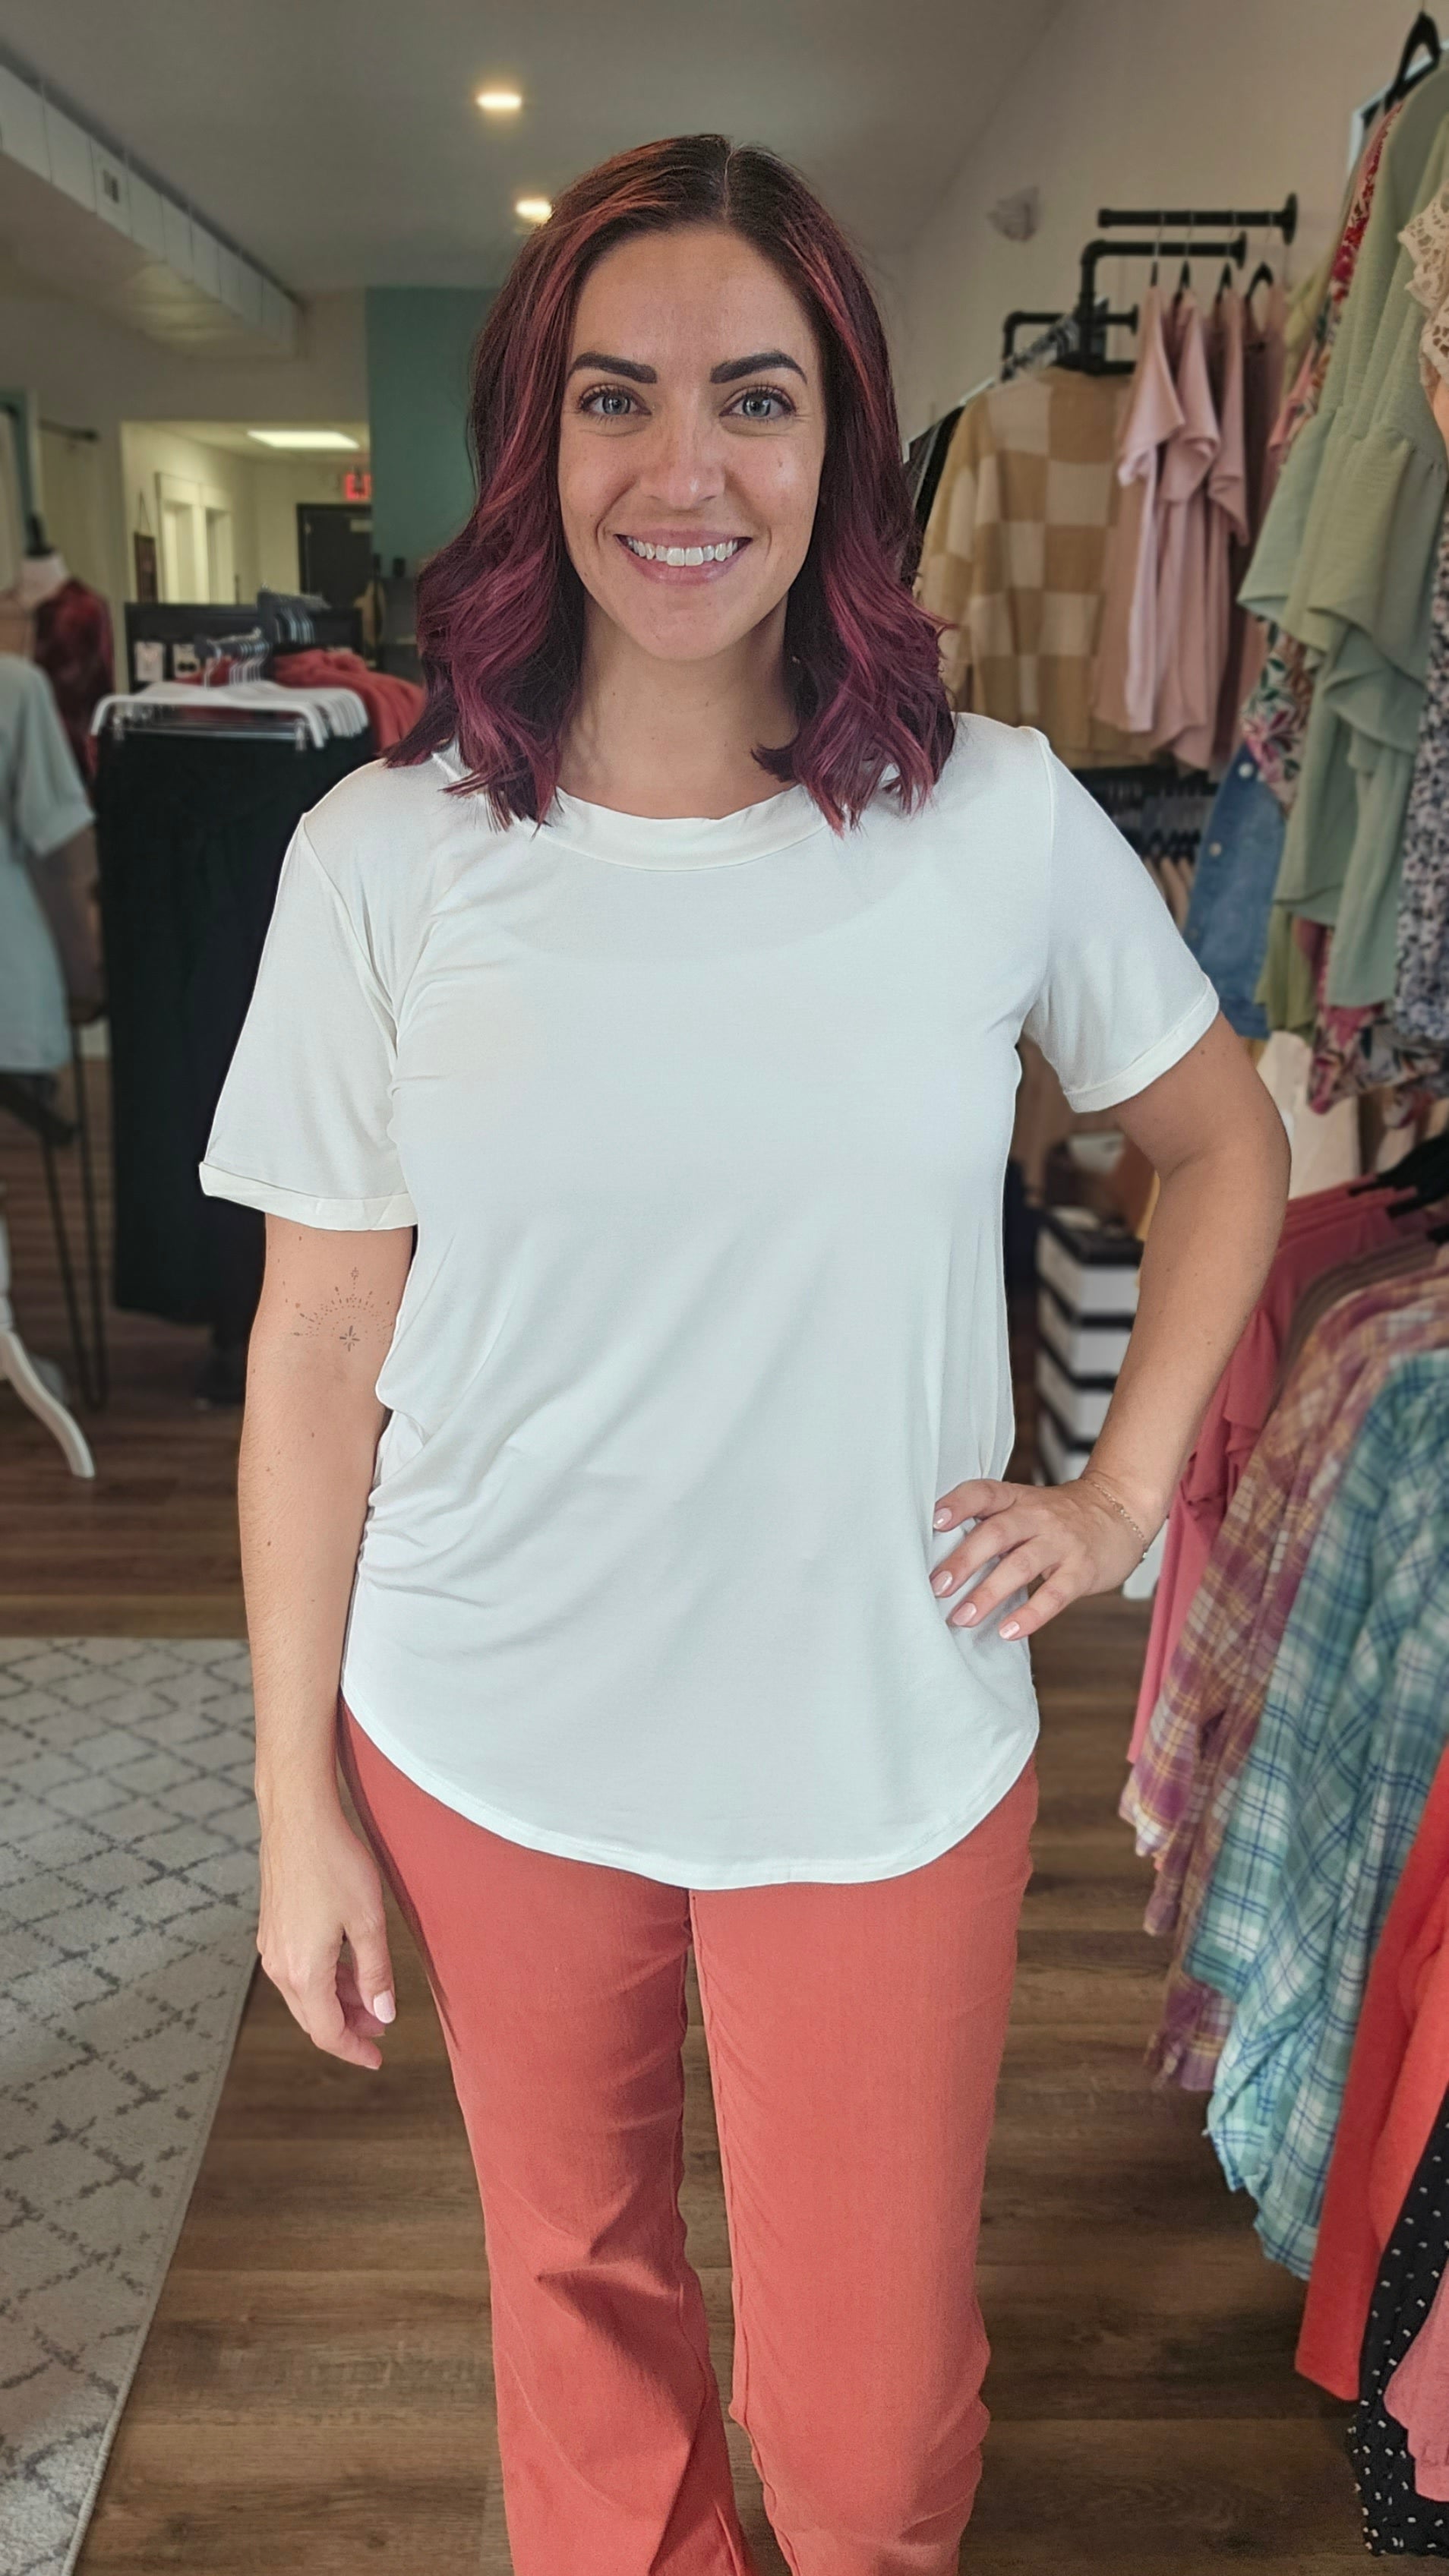 Shop Bella Casual Tee - Dove White-Shirts at Ruby Joy Boutique, a Women's Clothing Store in Pickerington, Ohio